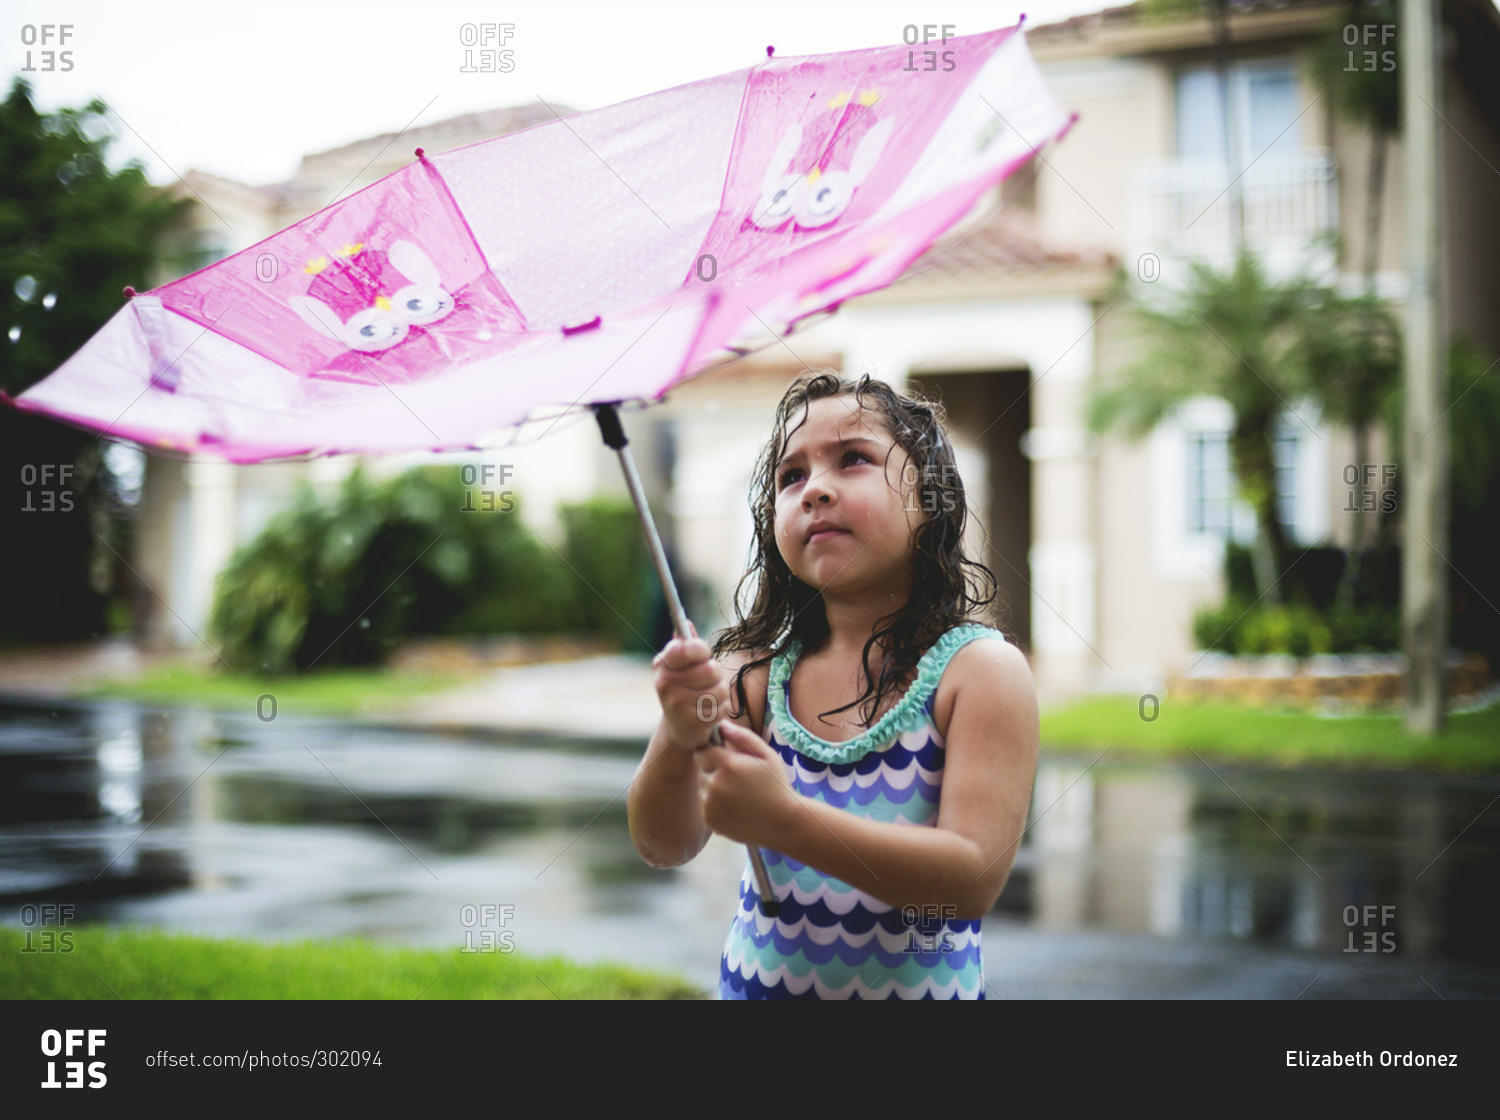 Young girl playing in a rain with an umbrella